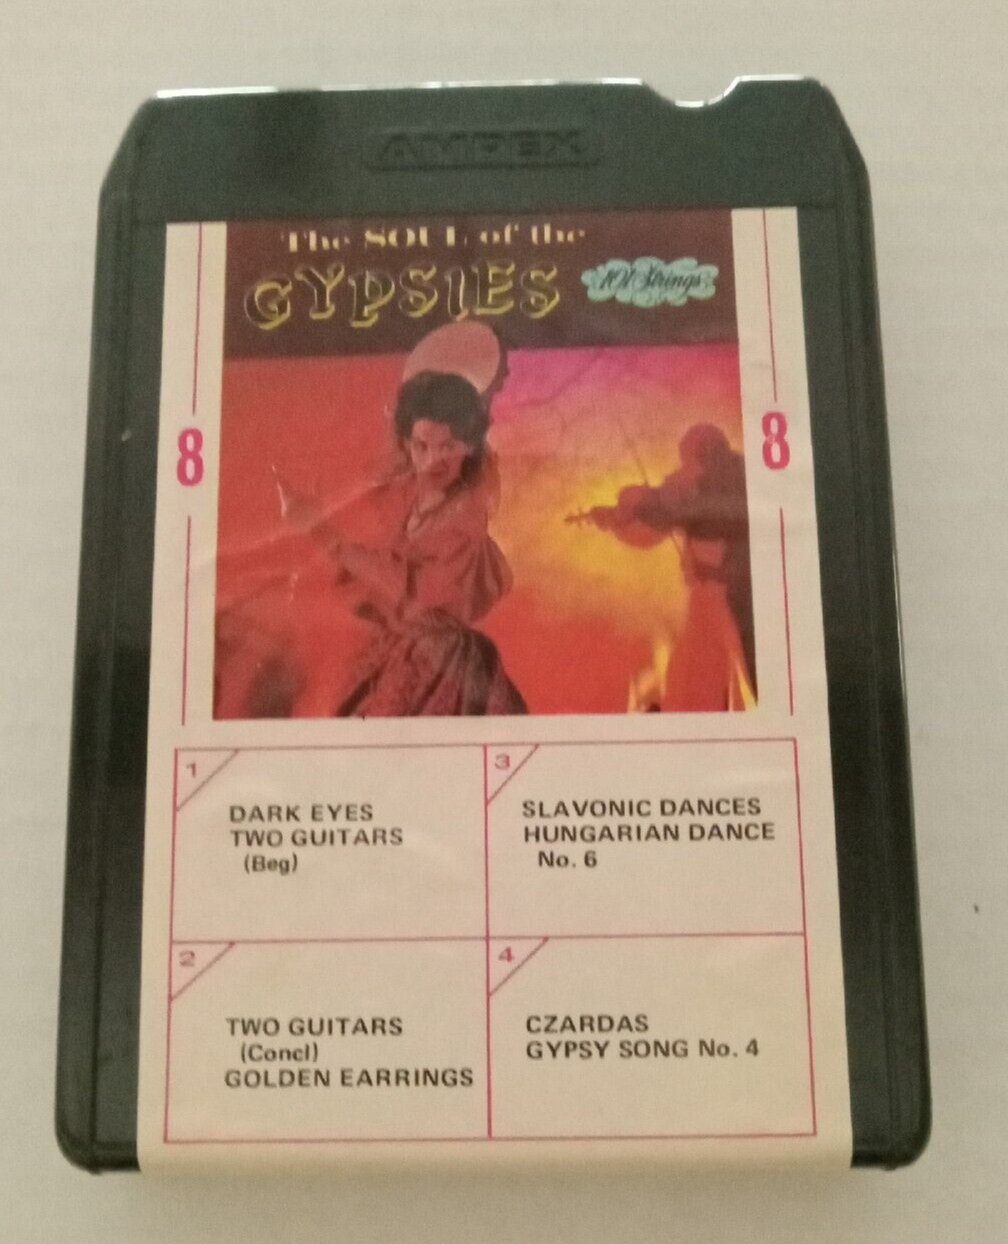 Primary image for 101 Strings 2 Albums- Soul of the Gypsies Vintage 8-track